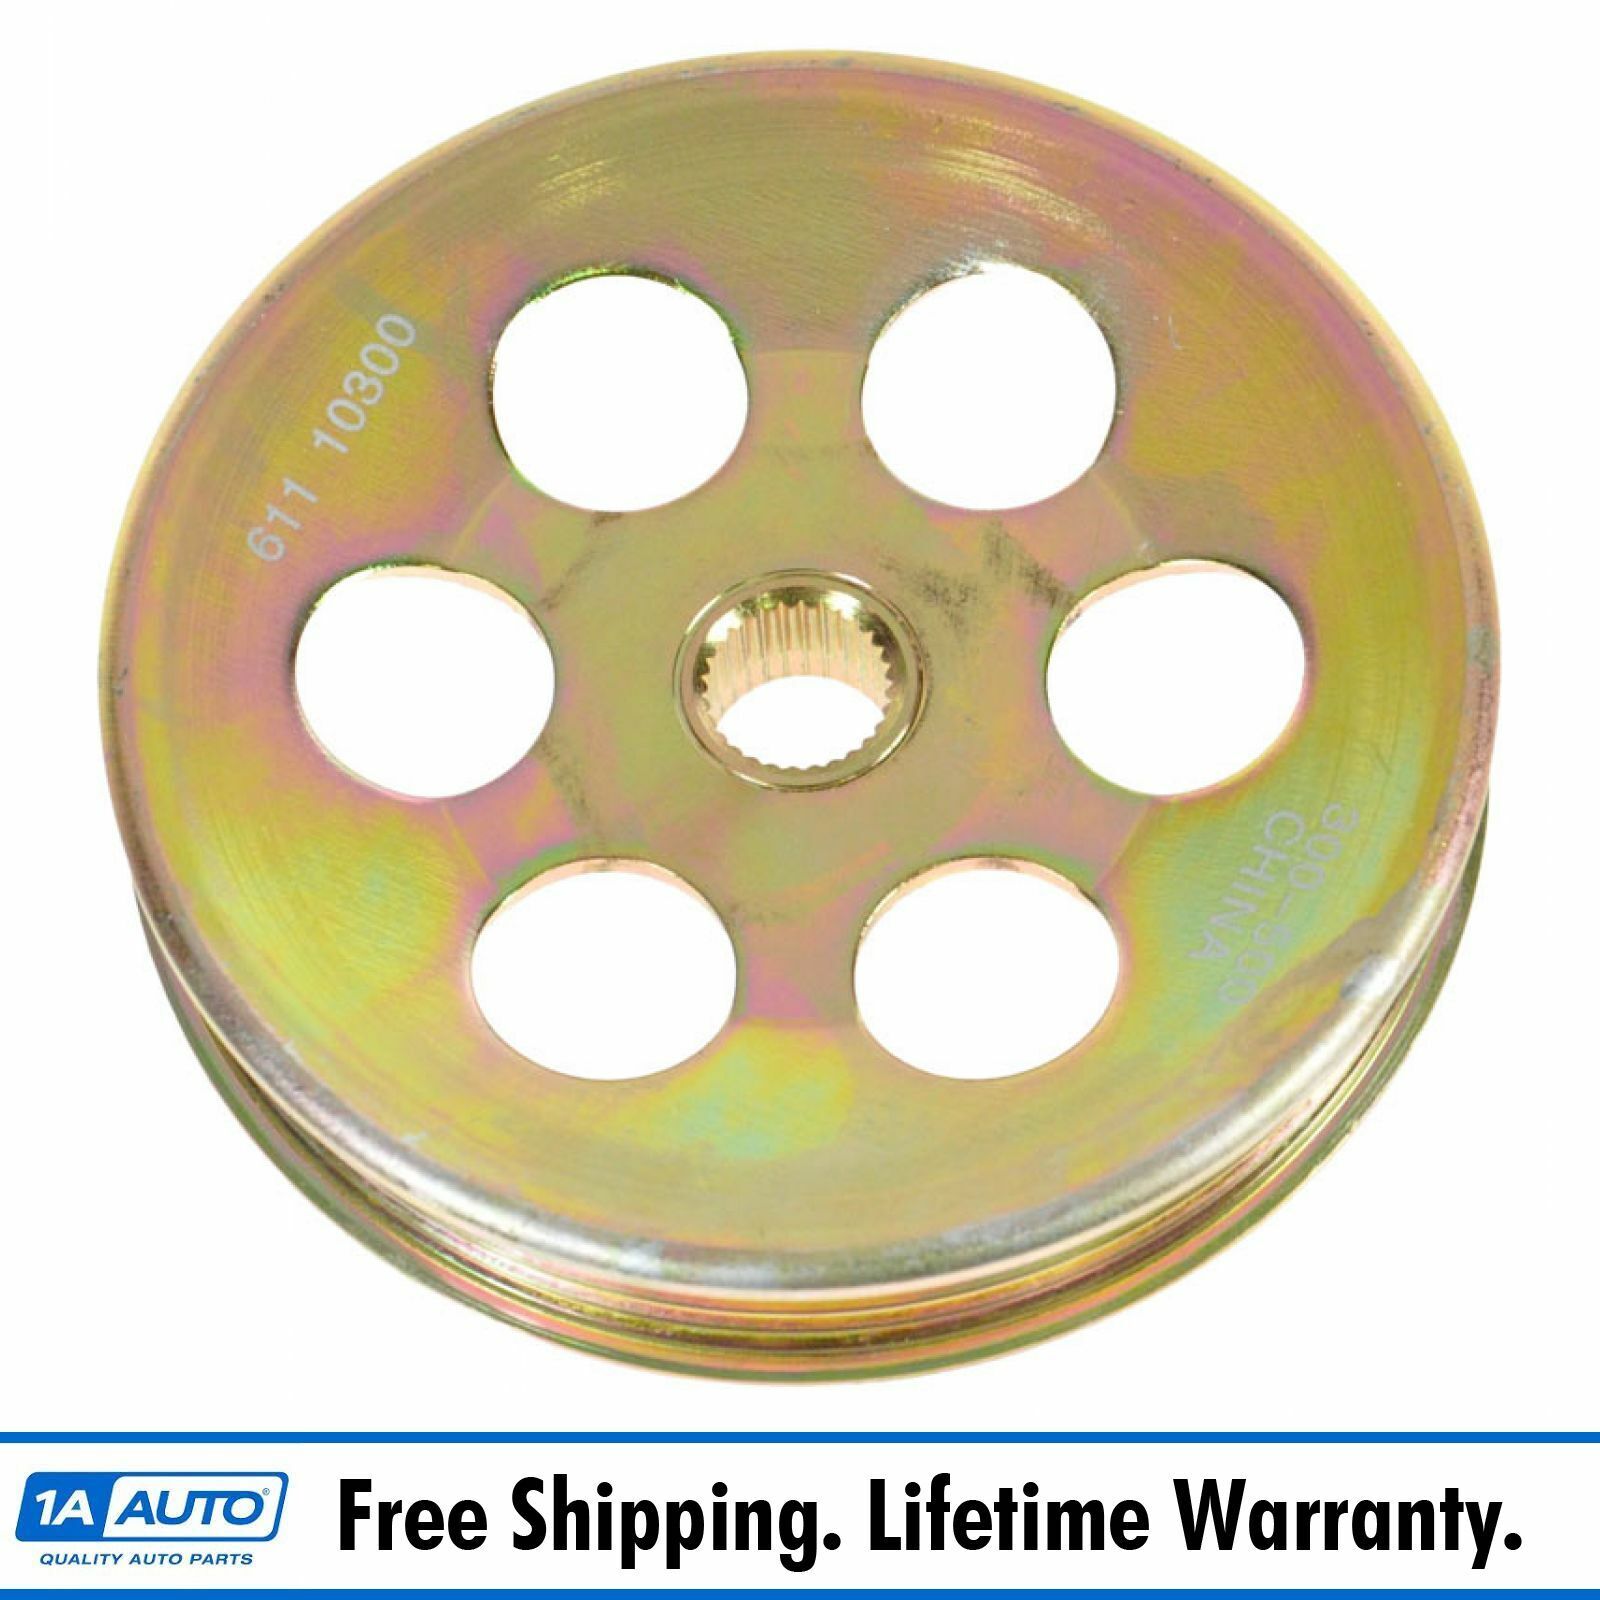 Power Steering Pump Pulley for Accord Civic CL Odyssey CR-V